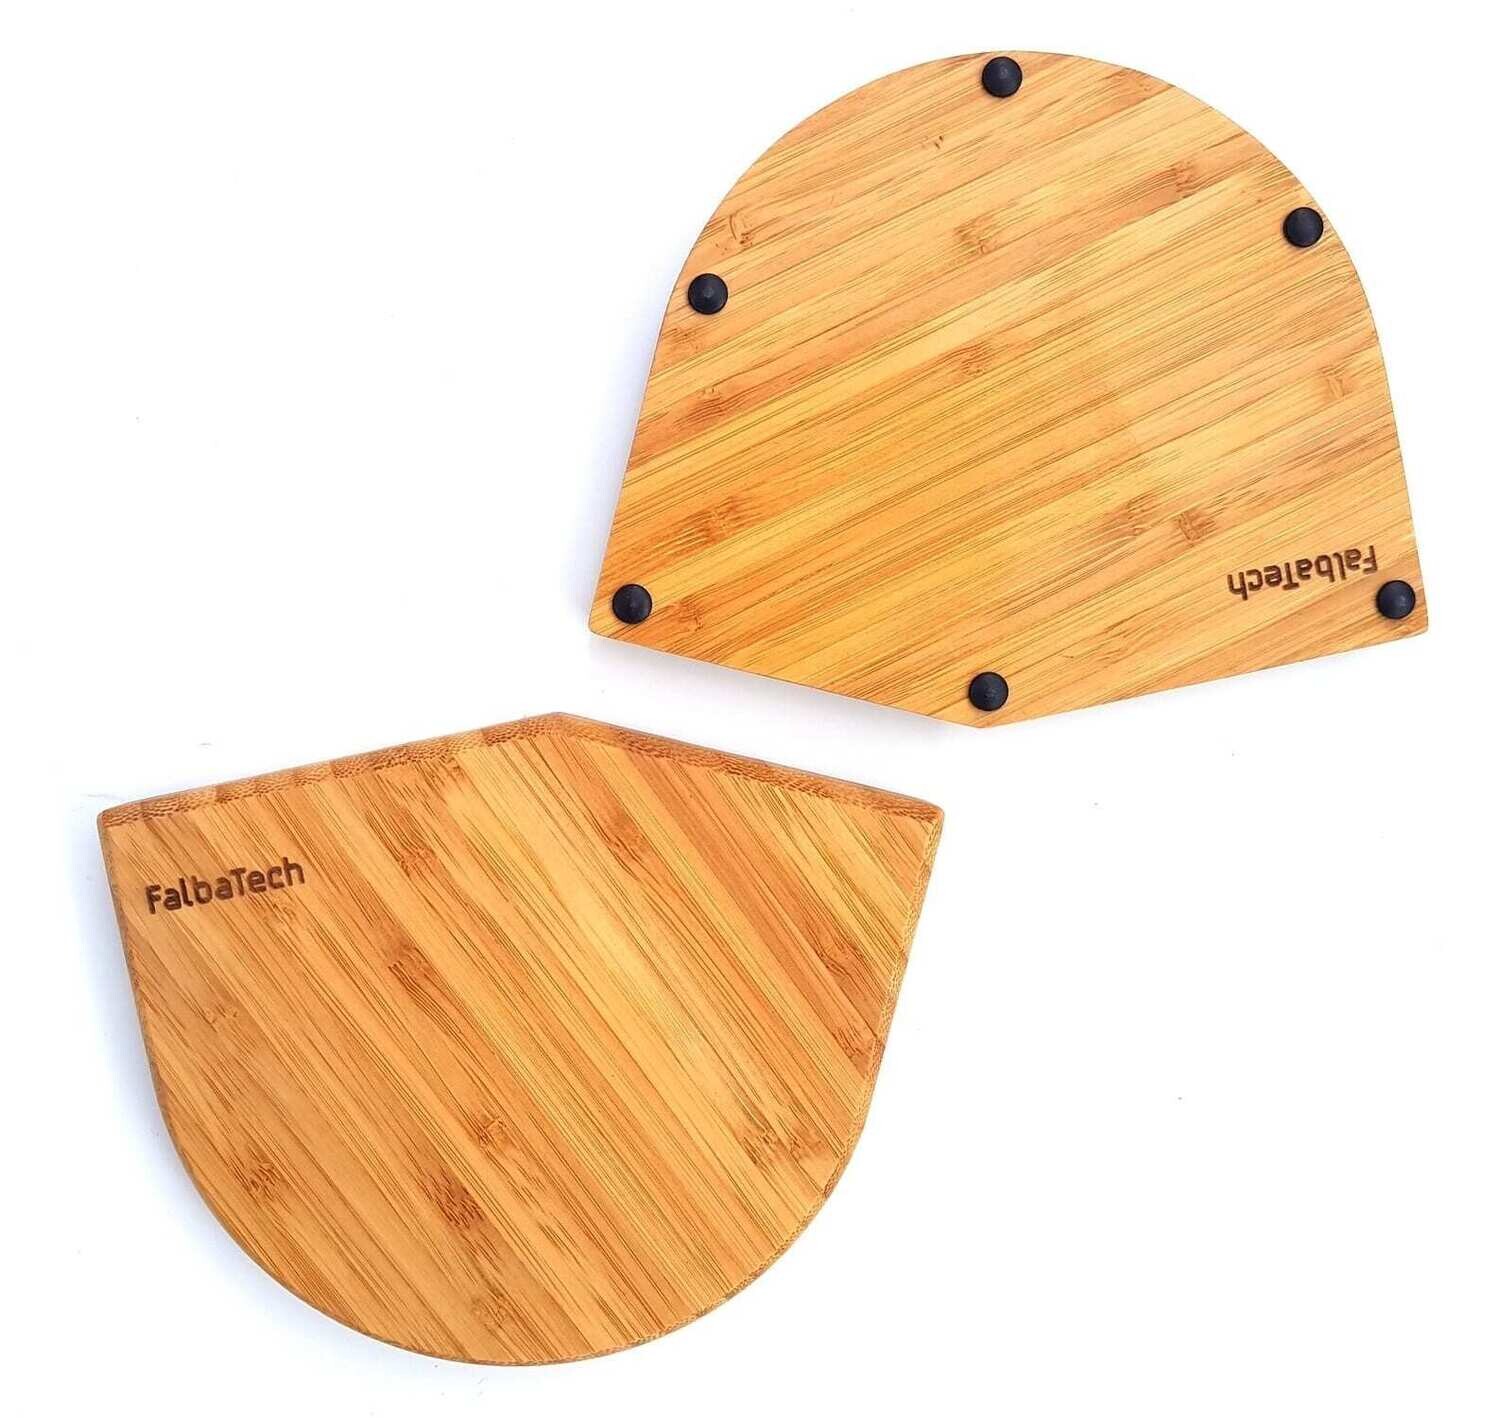 Set of wooden wrist rests for ErgoDox keyboard - Bamboo